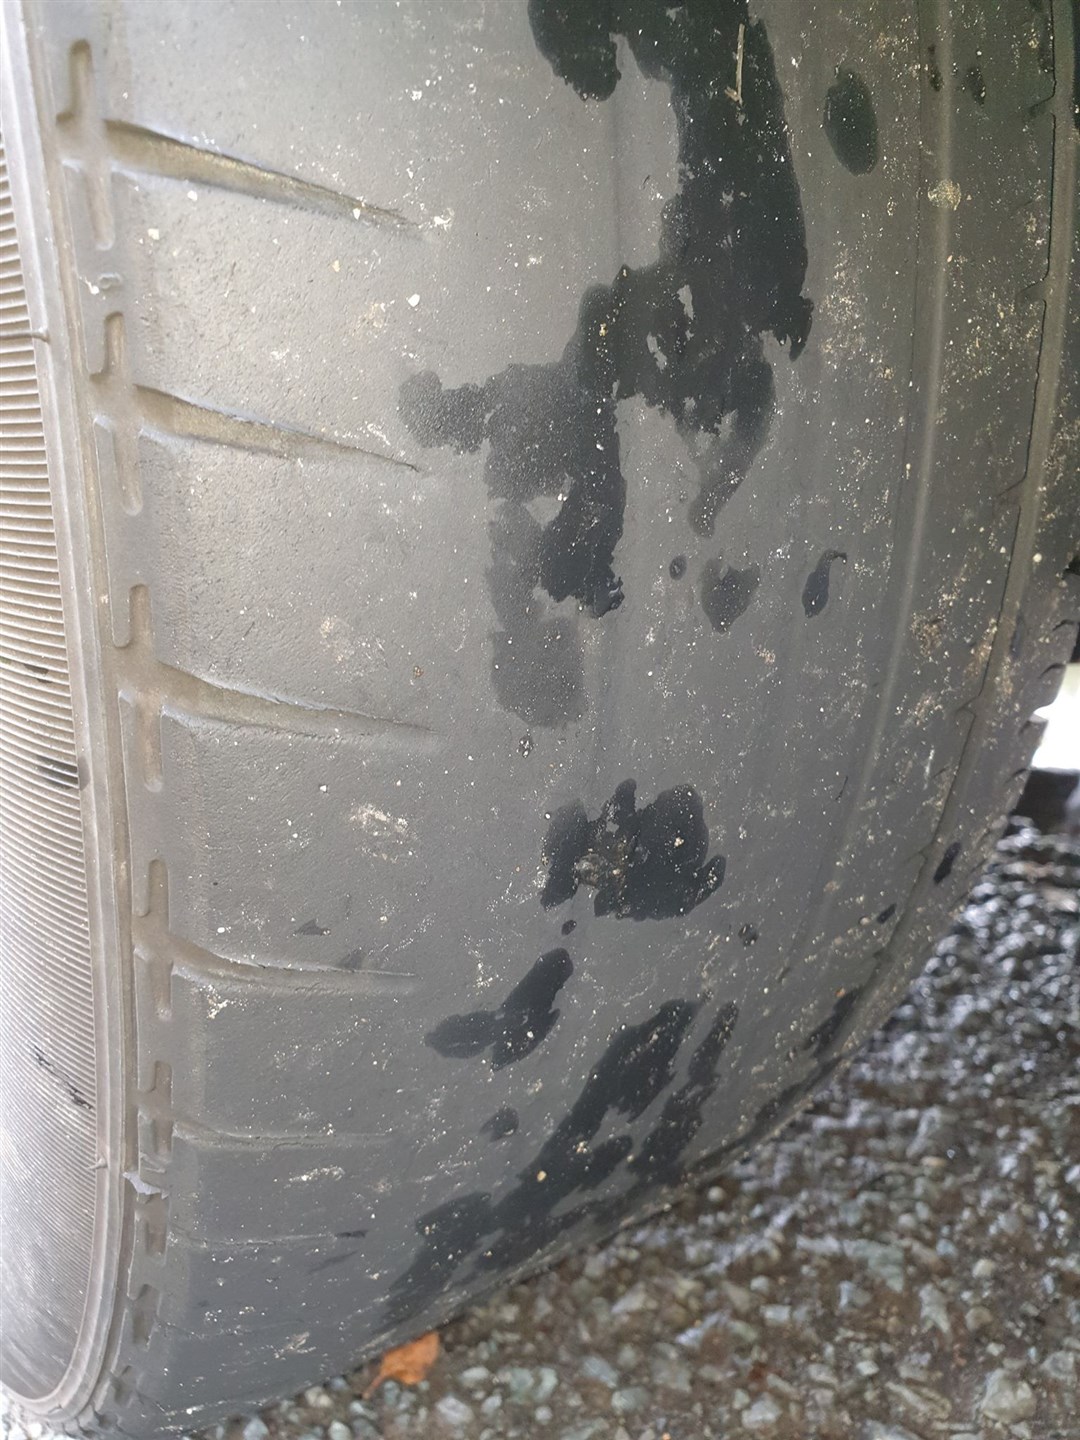 This bald tyre was one of the vehicle faults detected during the weekend's patrols. Picture: Police Scotland.